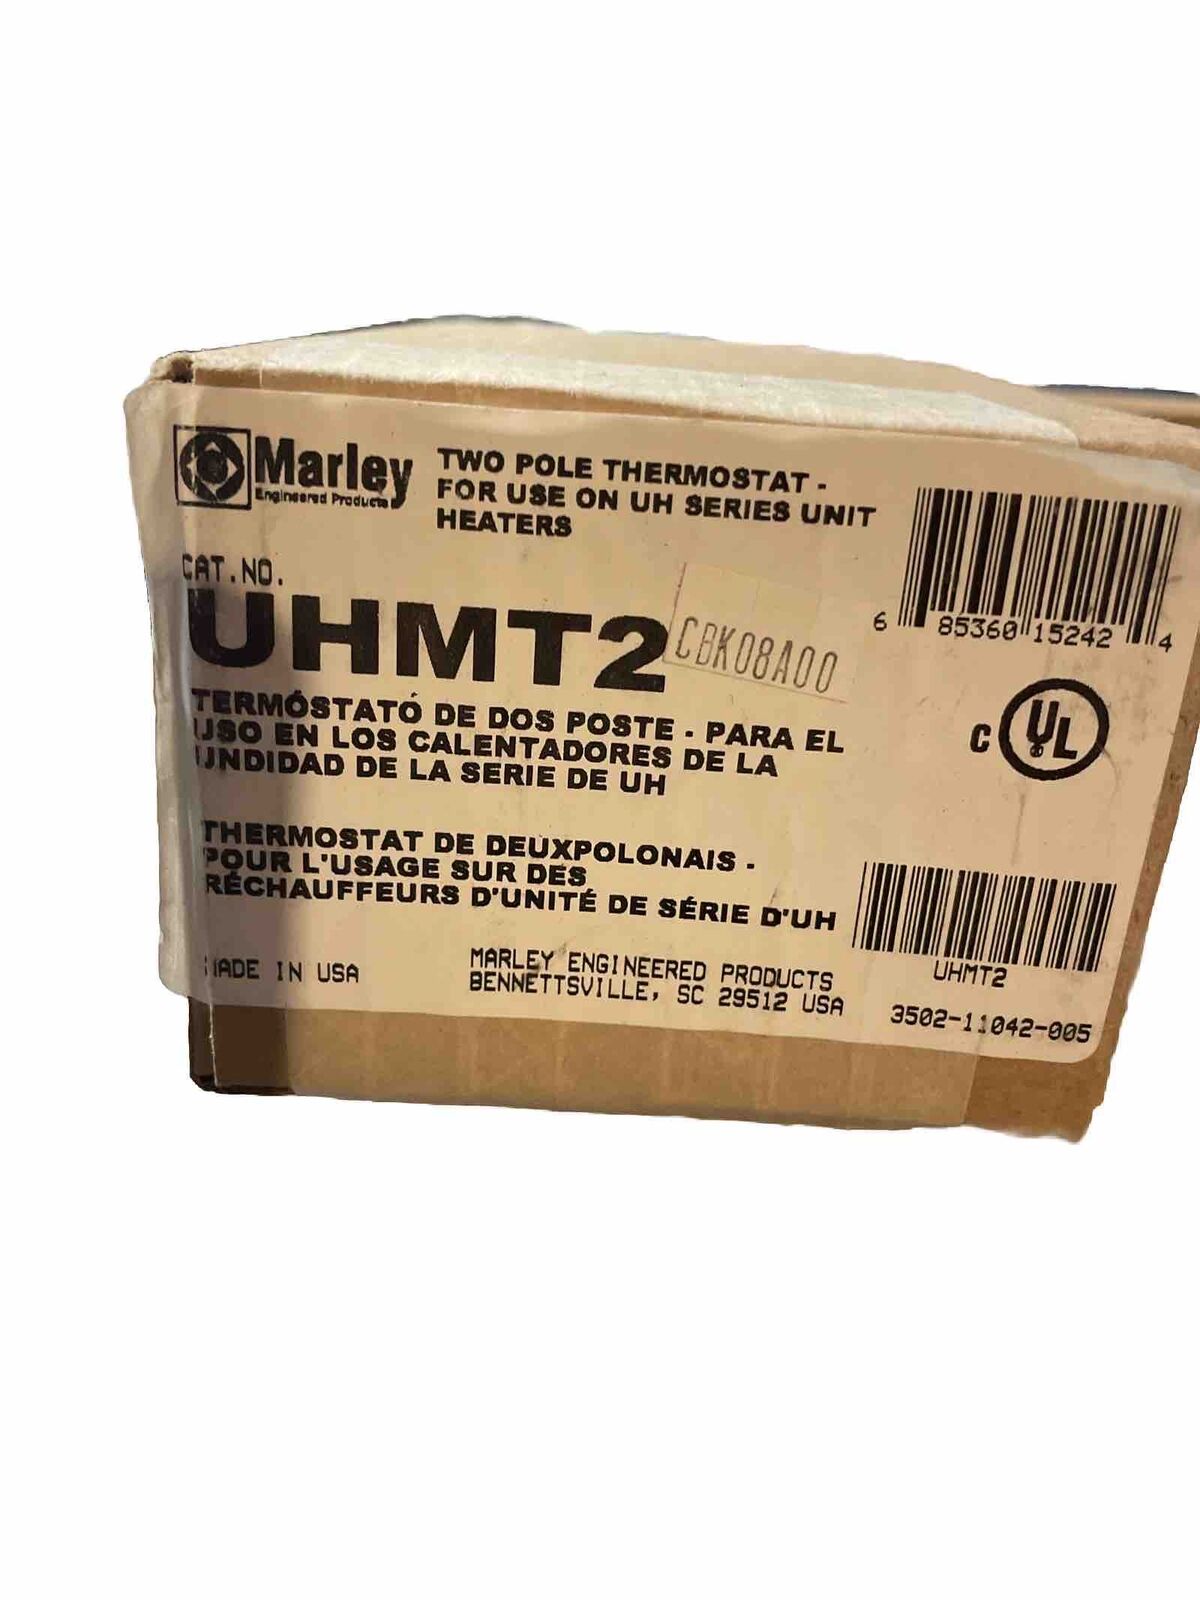 Marley Engineered Products UHMT2 Two Pole Thermostat Use On UH Series Heaters